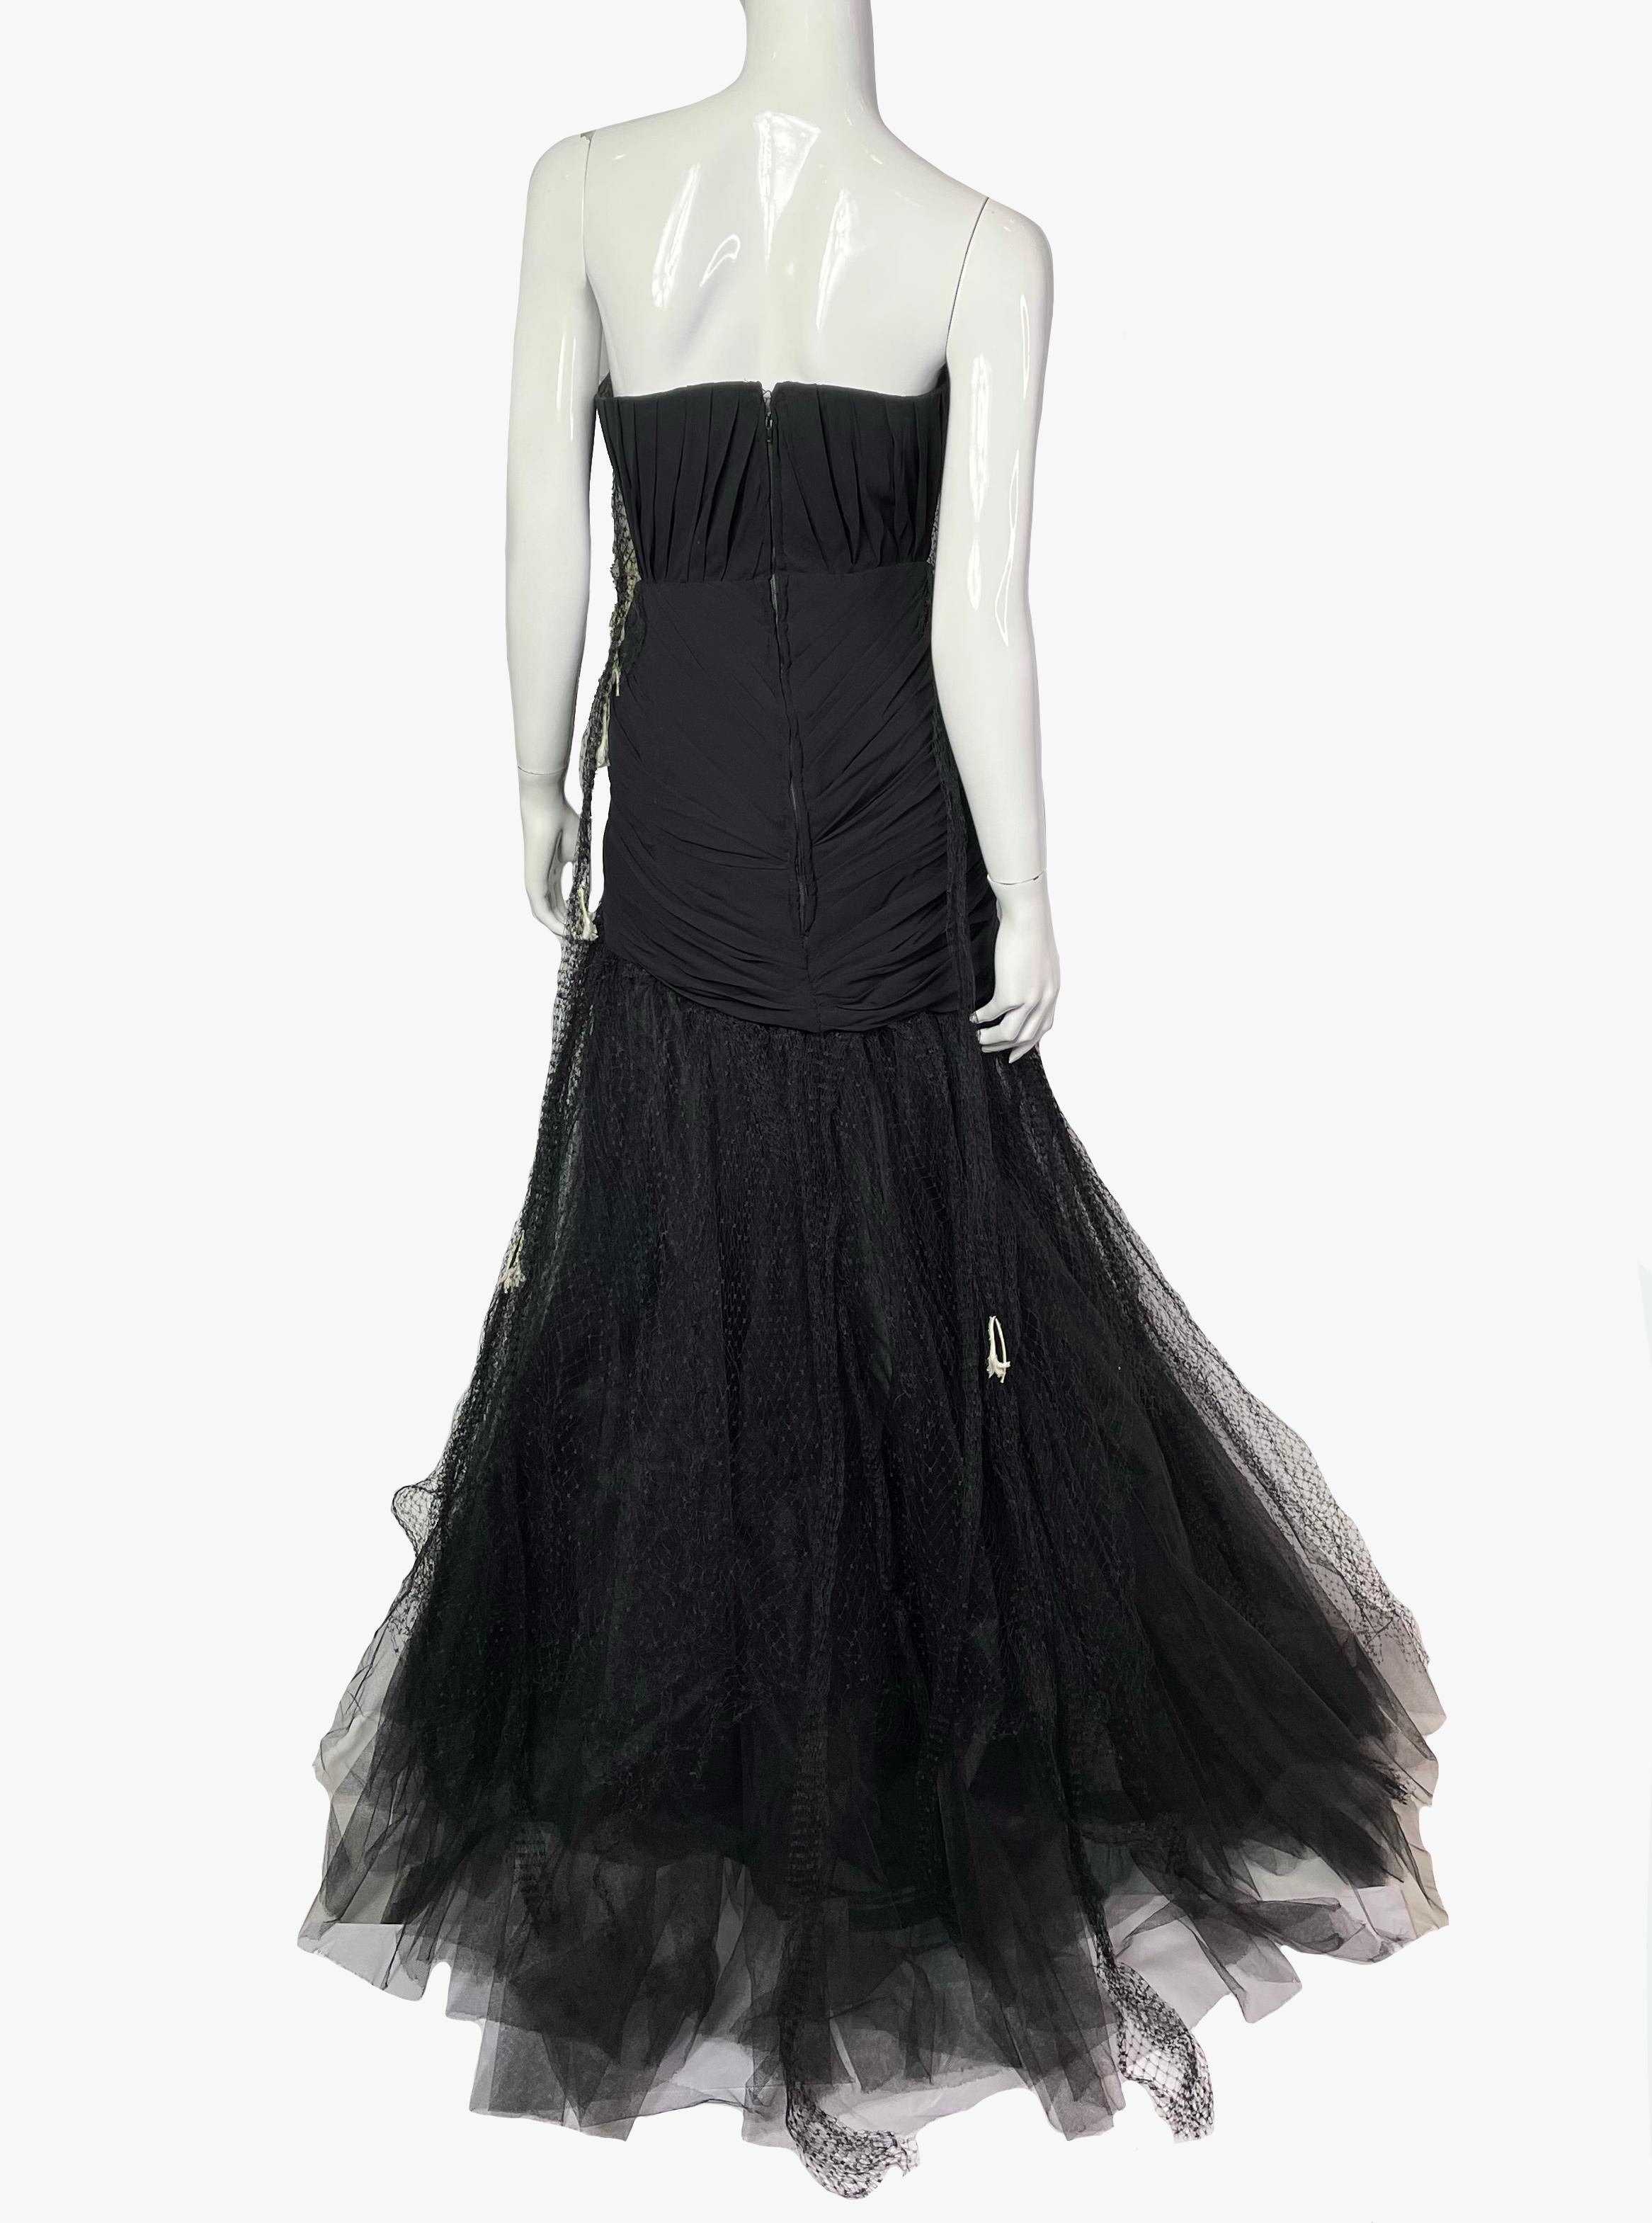 Tan Giudicelli vintage bustier black couture gown, 1980s For Sale 3